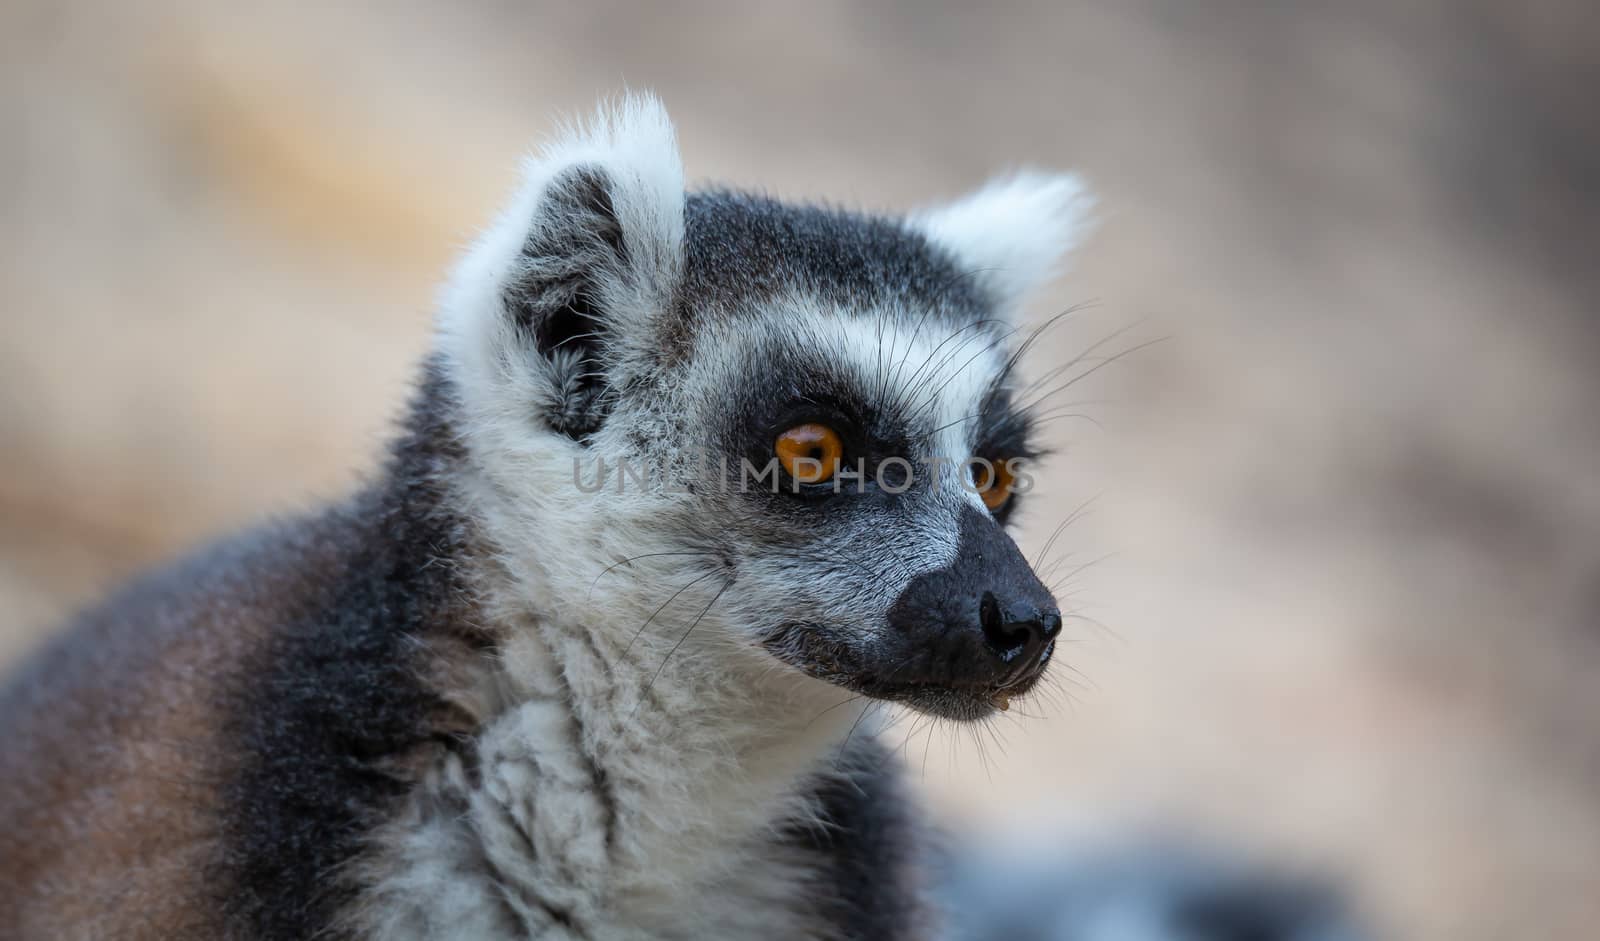 A portrait of a ring-tailed lemur in close-up by 25ehaag6